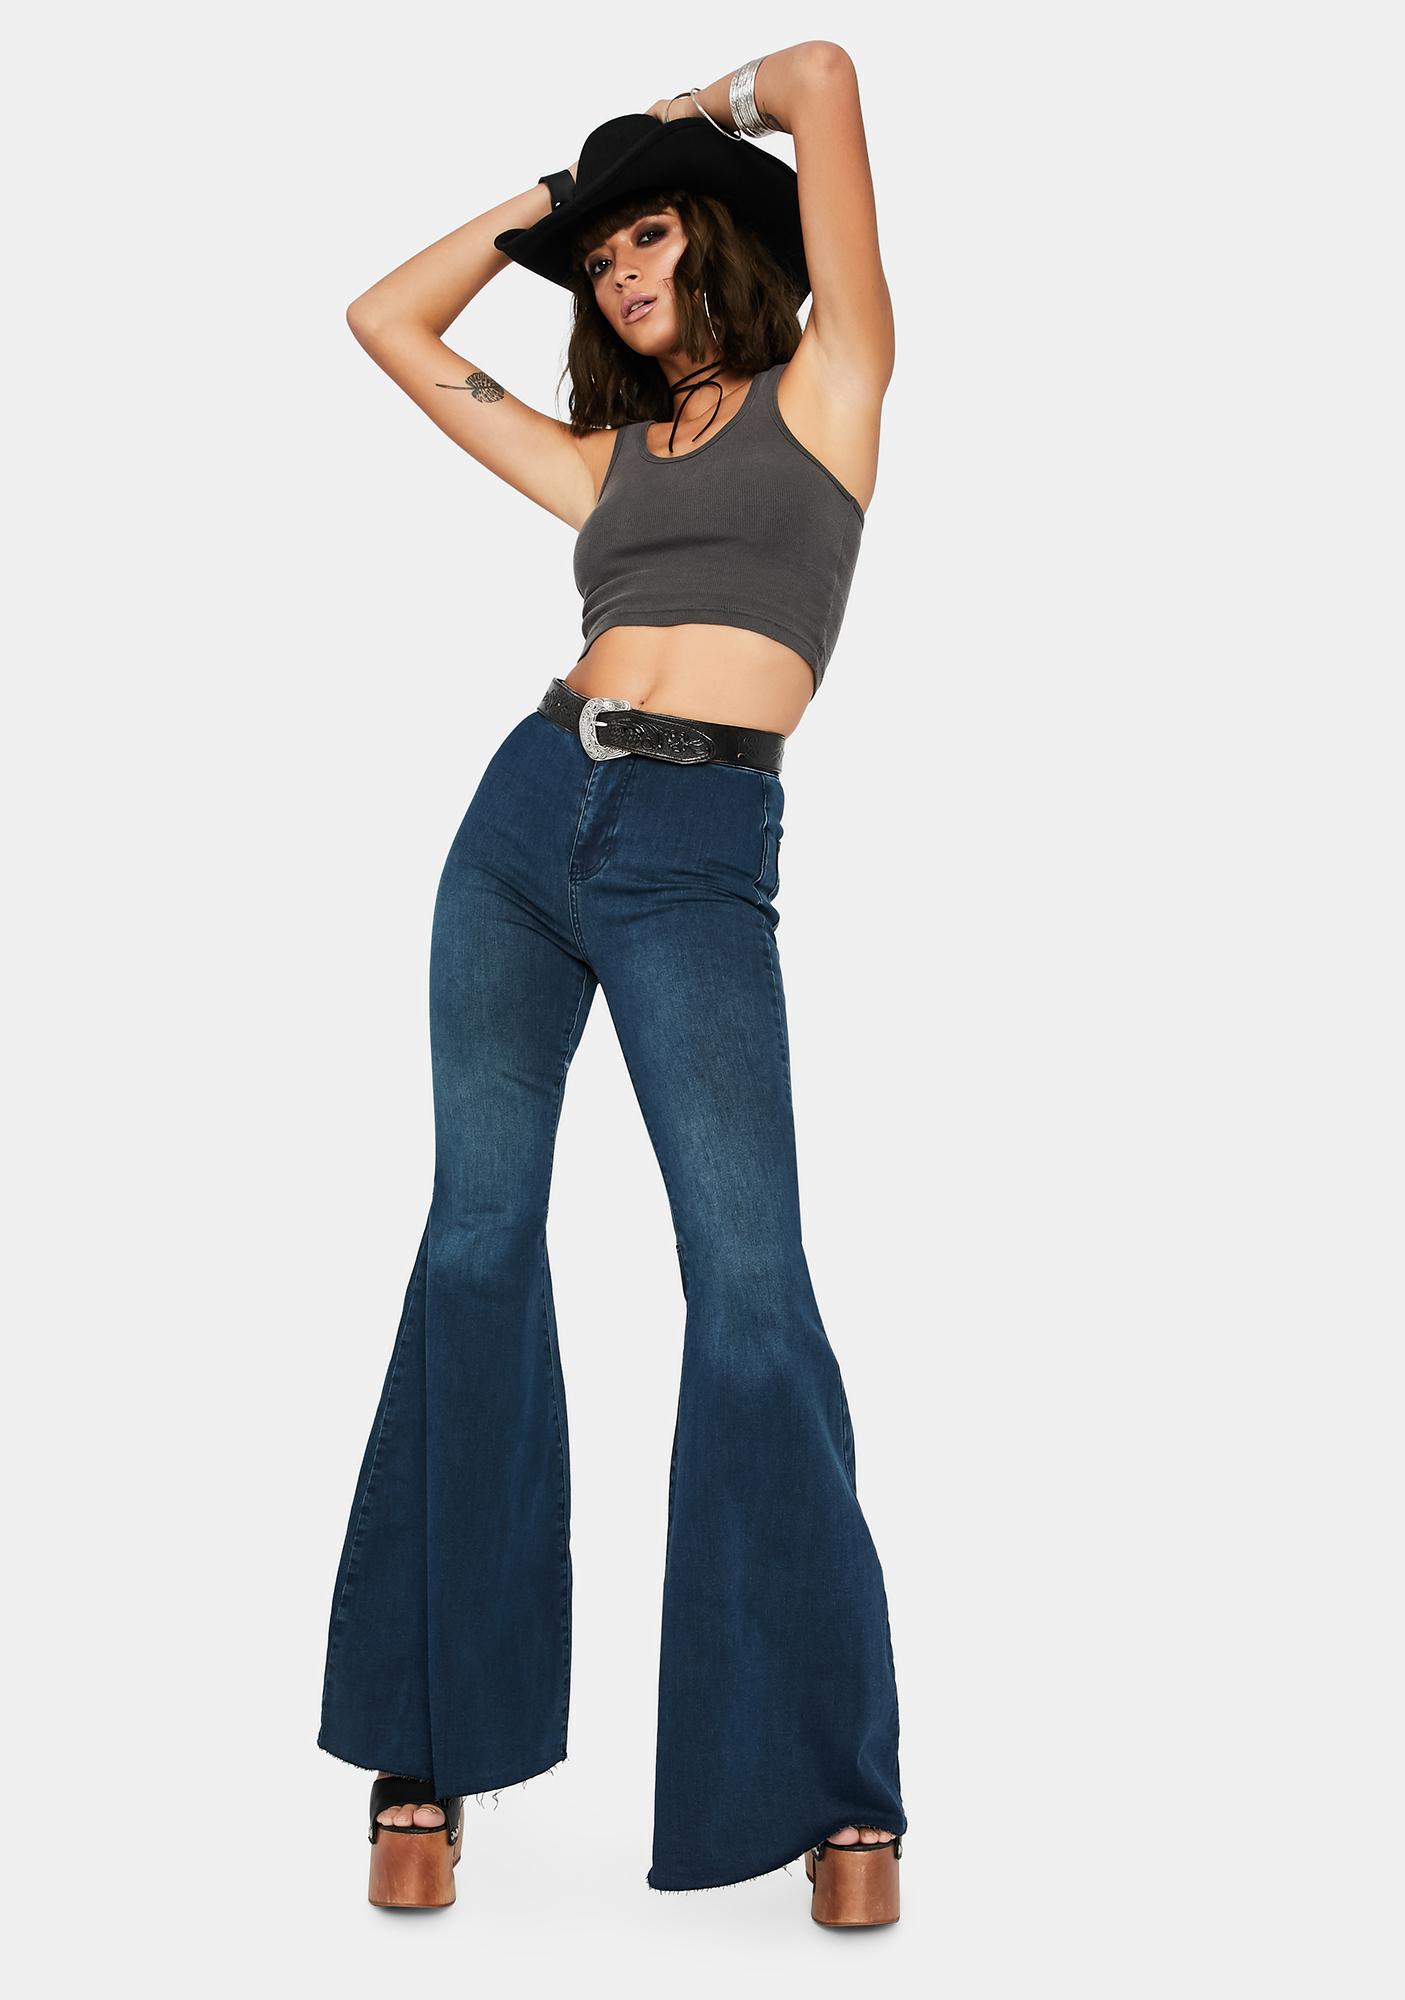 just float on flare jeans long